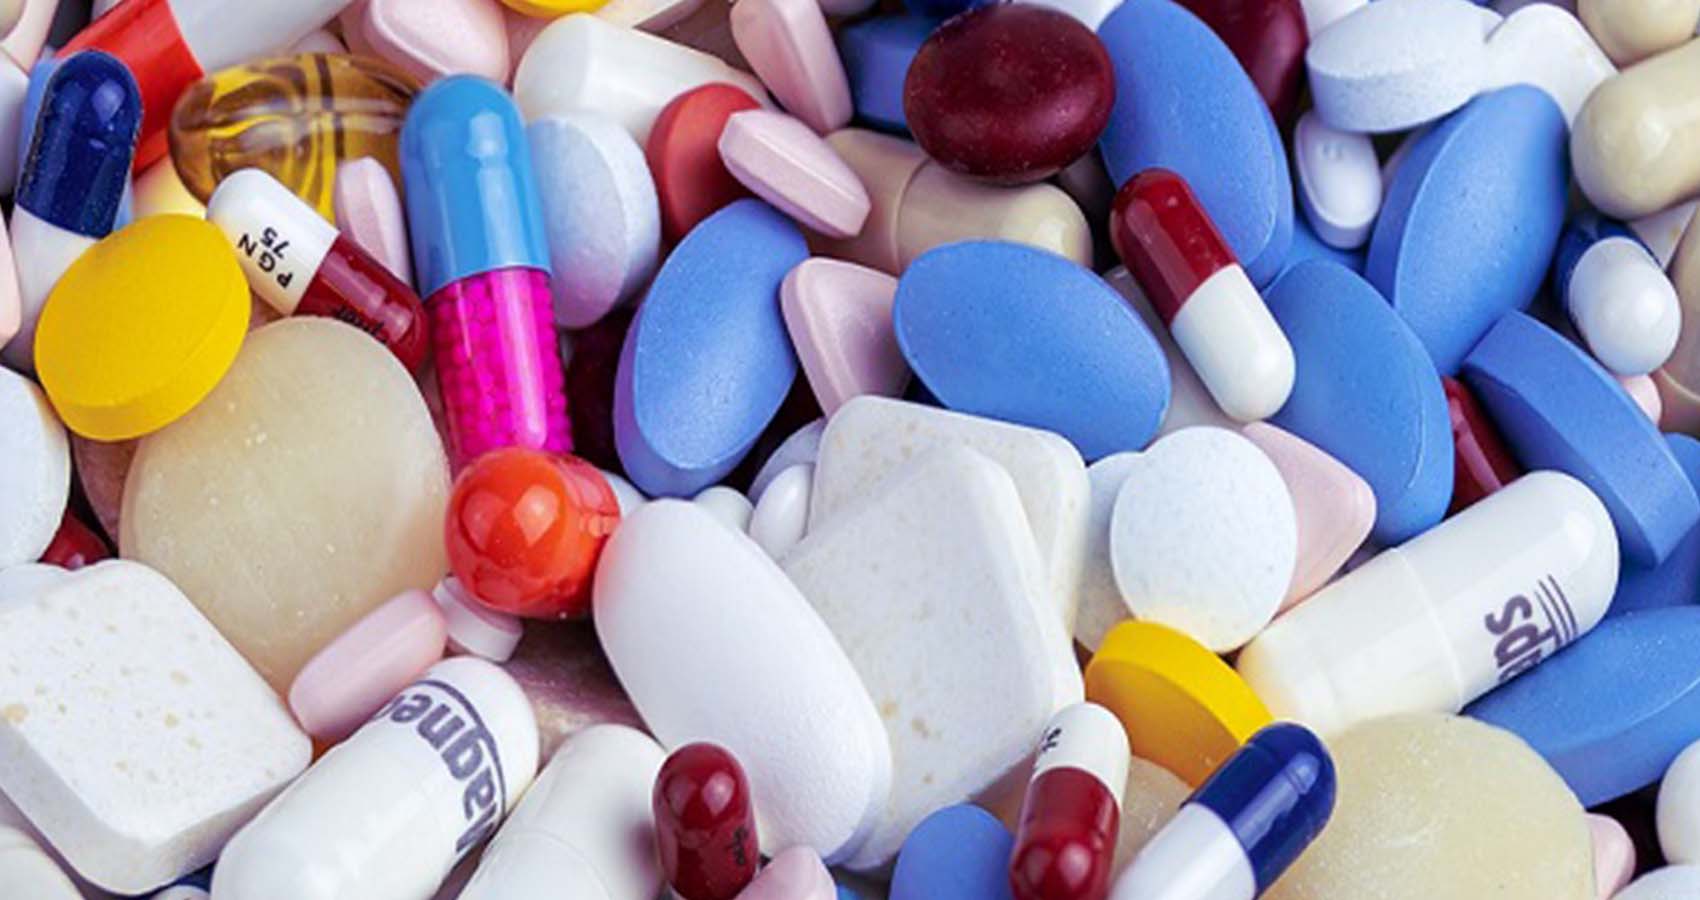 India’s Pharma Exports Rise 103% In 8 Years